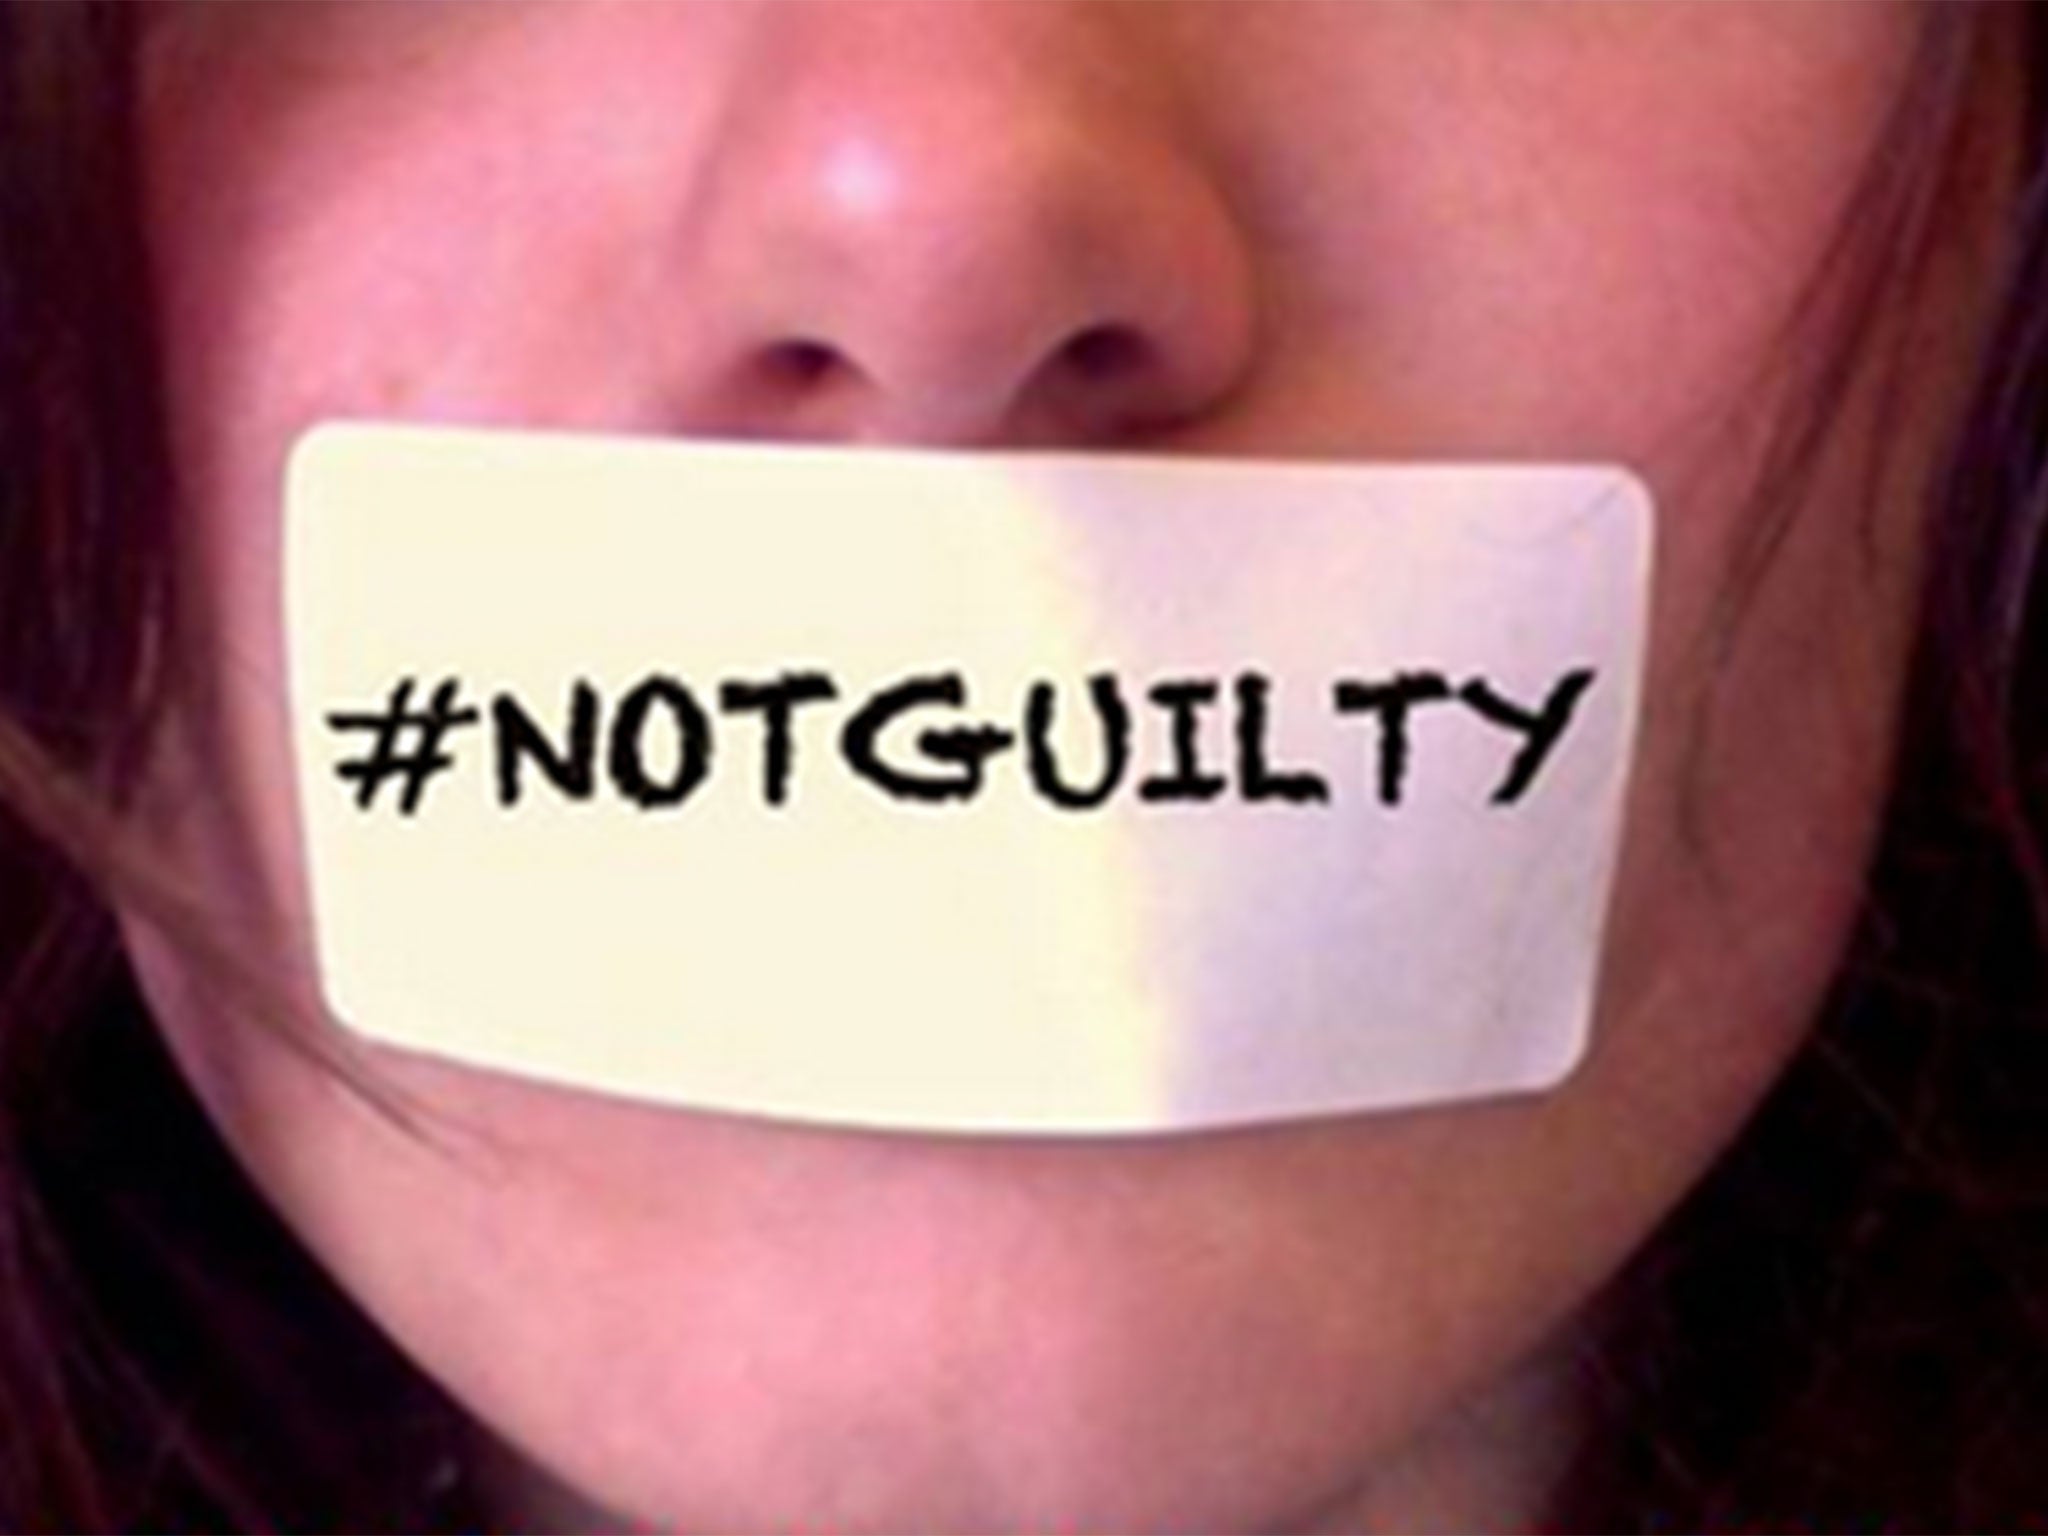 Ione Wells has launched the #NotGuilty campaign to raise awareness of sexual assault